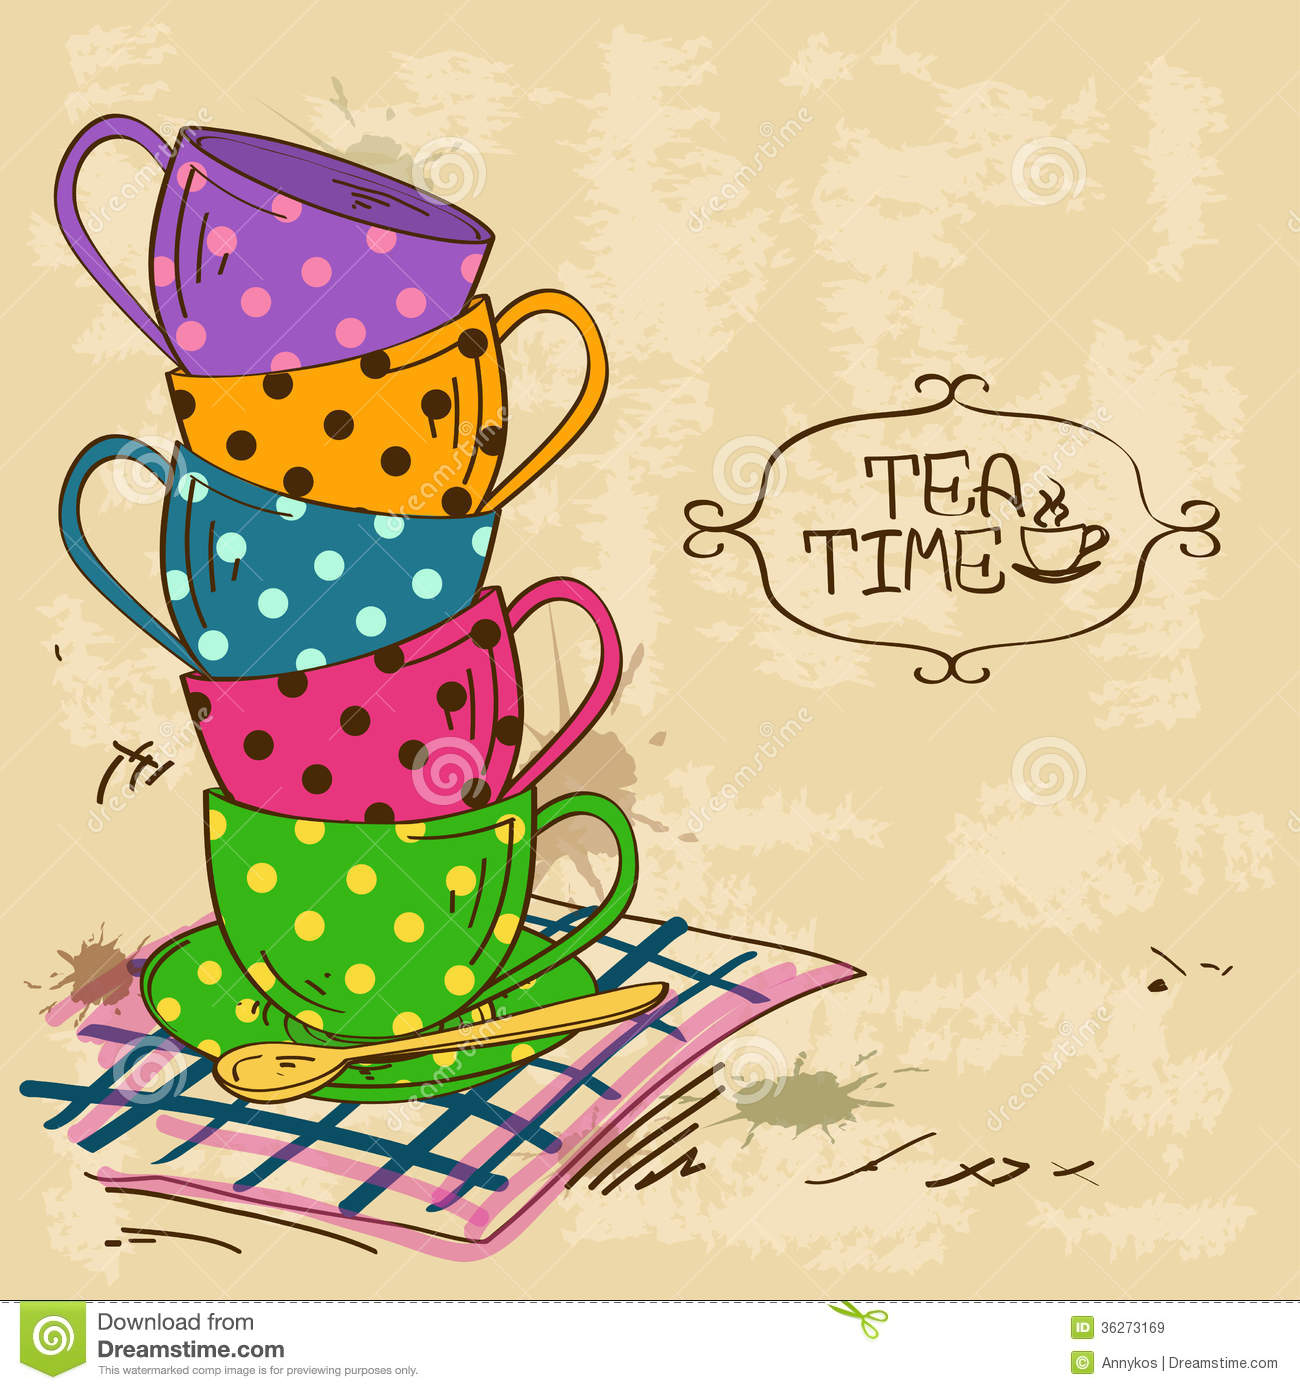 Illustration With Stack Of Tea Cups Royalty Free Stock Images   Image